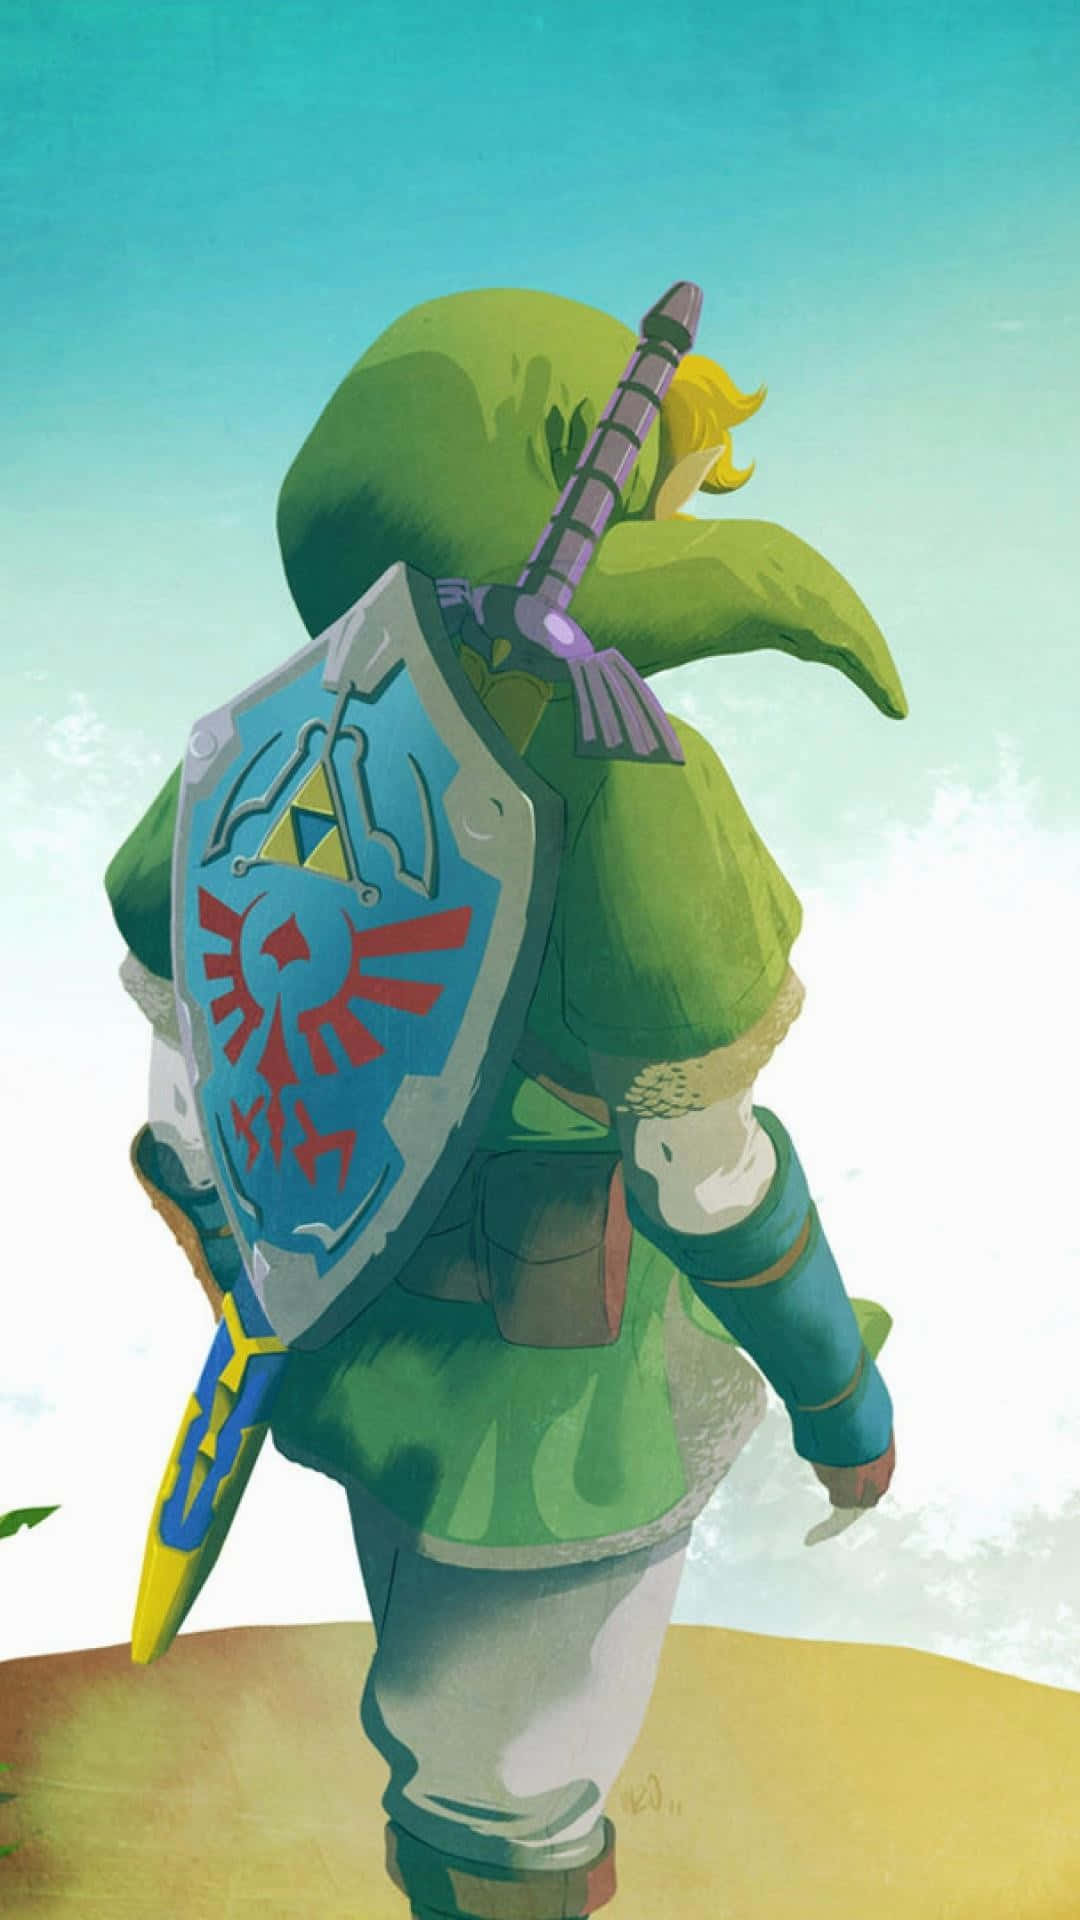 "Explore a world of adventure with the Legend of Zelda iPhone!" Wallpaper